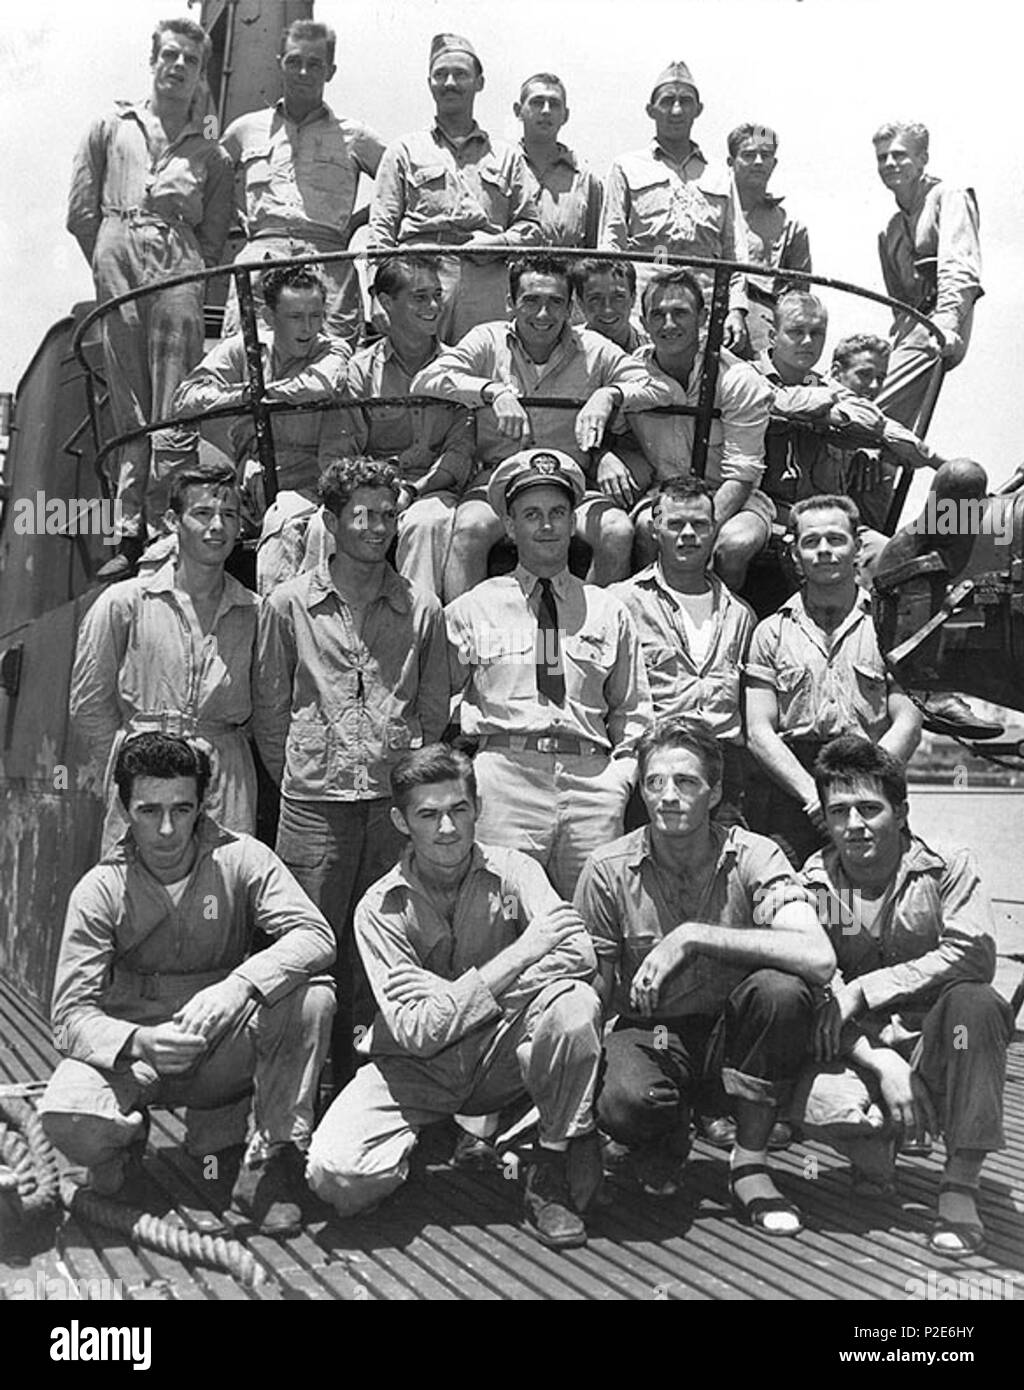 . The U.S. Navy submarine USS Tang (SS-306) at Pearl Harbor, Hawaii (USA), in May 1944. The submarine's Commanding Officer, Lieutenant Commander Richard H. O'Kane (center), poses with the twenty-two aircrewmen that Tang rescued off Truk during the carrier air raids there on 29 April-1 May 1944. The photograph was taken upon Tang´s return to Pearl Harbor from her second war patrol, in May 1944. Those present are are (front row, left to right): Aviation Radioman 2nd Class Harry B. Gemmell; Aviation Radioman 2nd Class Joseph Hranek; Aviation Radioman 1st Class James L. Livingston; and Aviation Ma Stock Photo